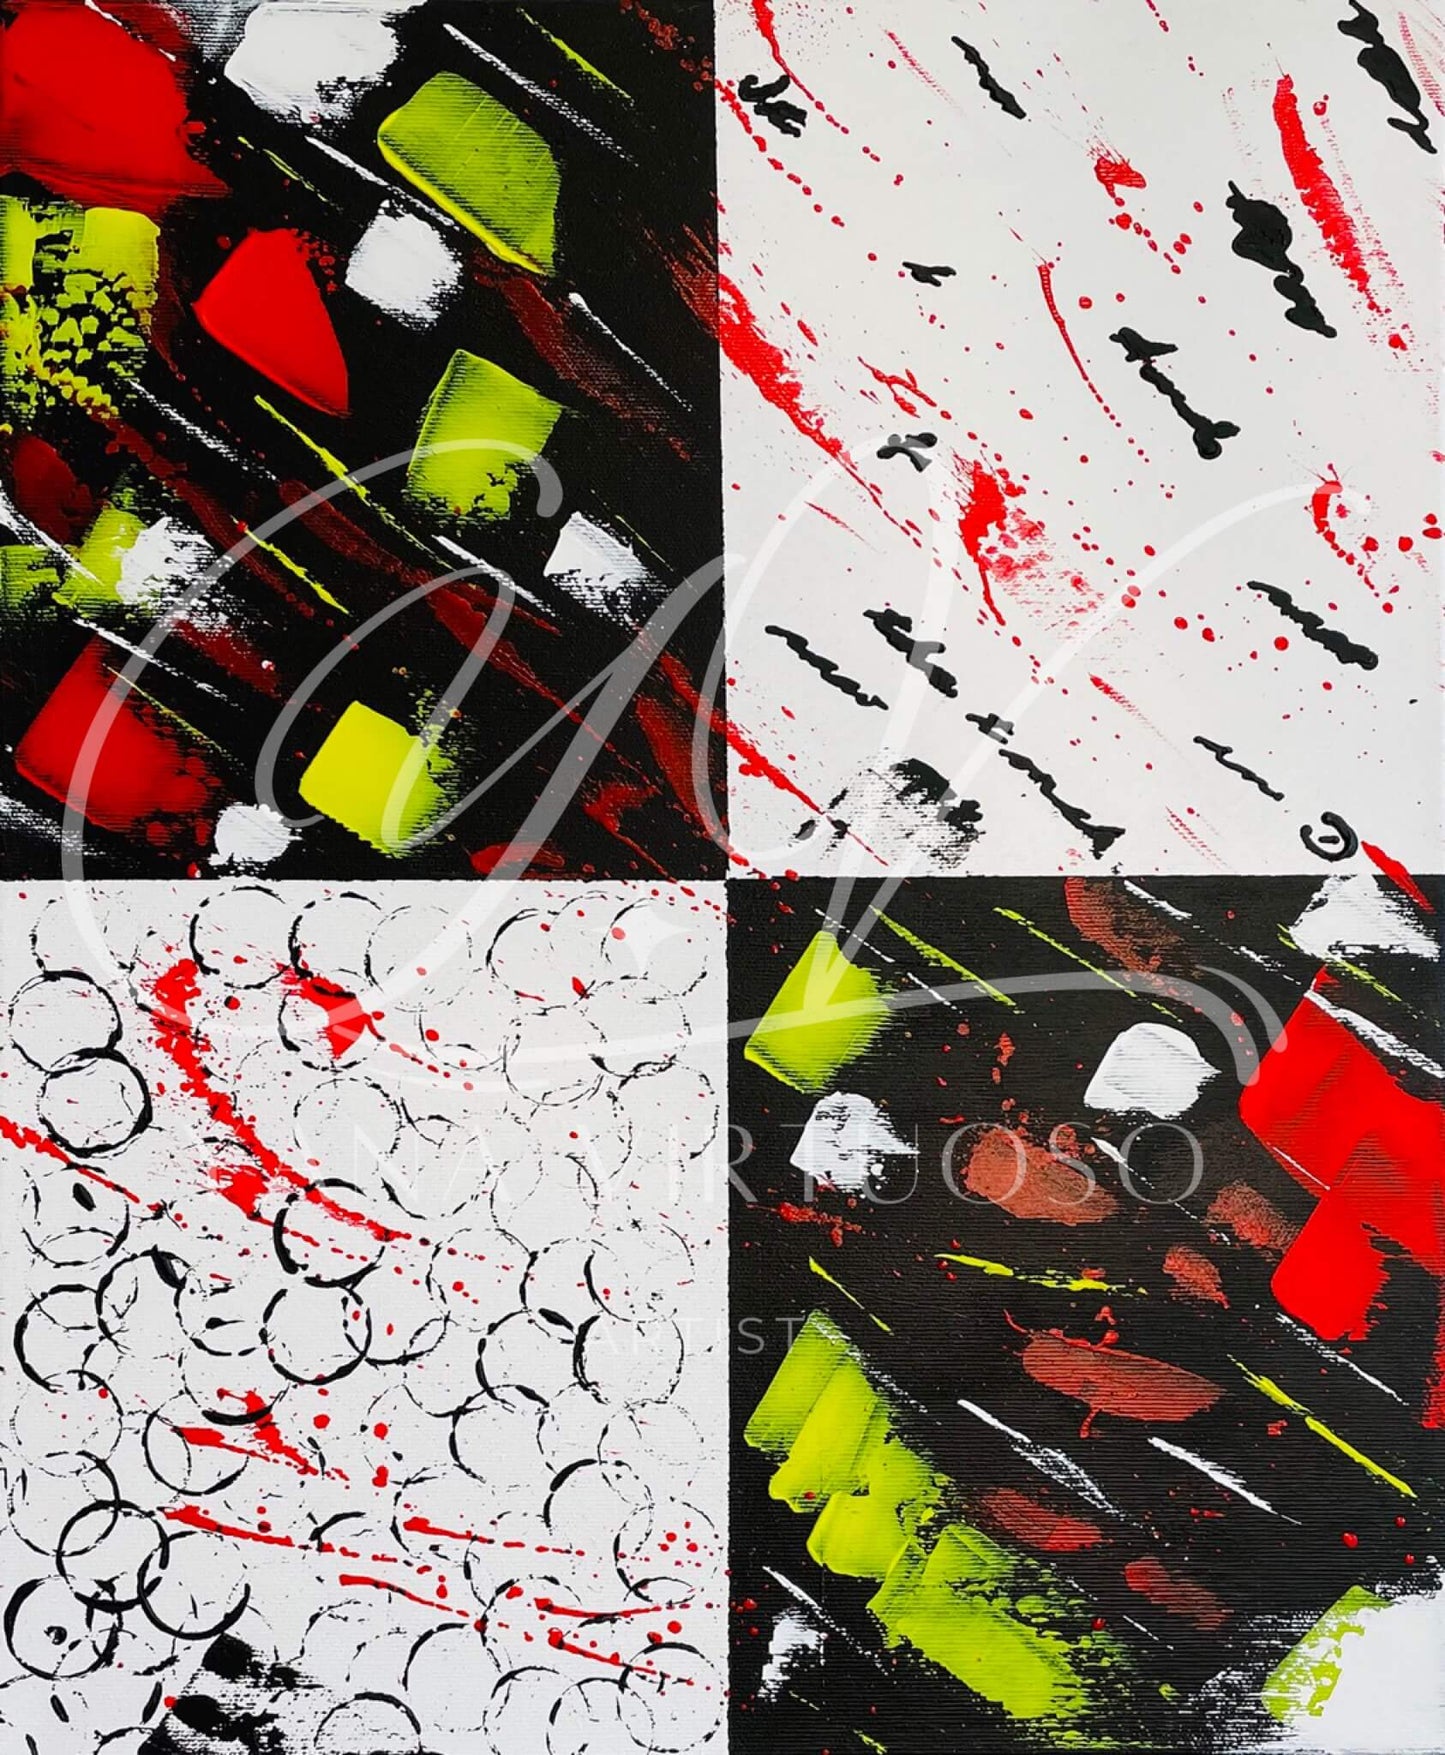 Close-up view of "Flight of Human Emotions" revealing the vibrant interplay of red and yellow hues with expressive brush strokes and splashes against a canvas divided into black and white sections, symbolizing a range of emotions.